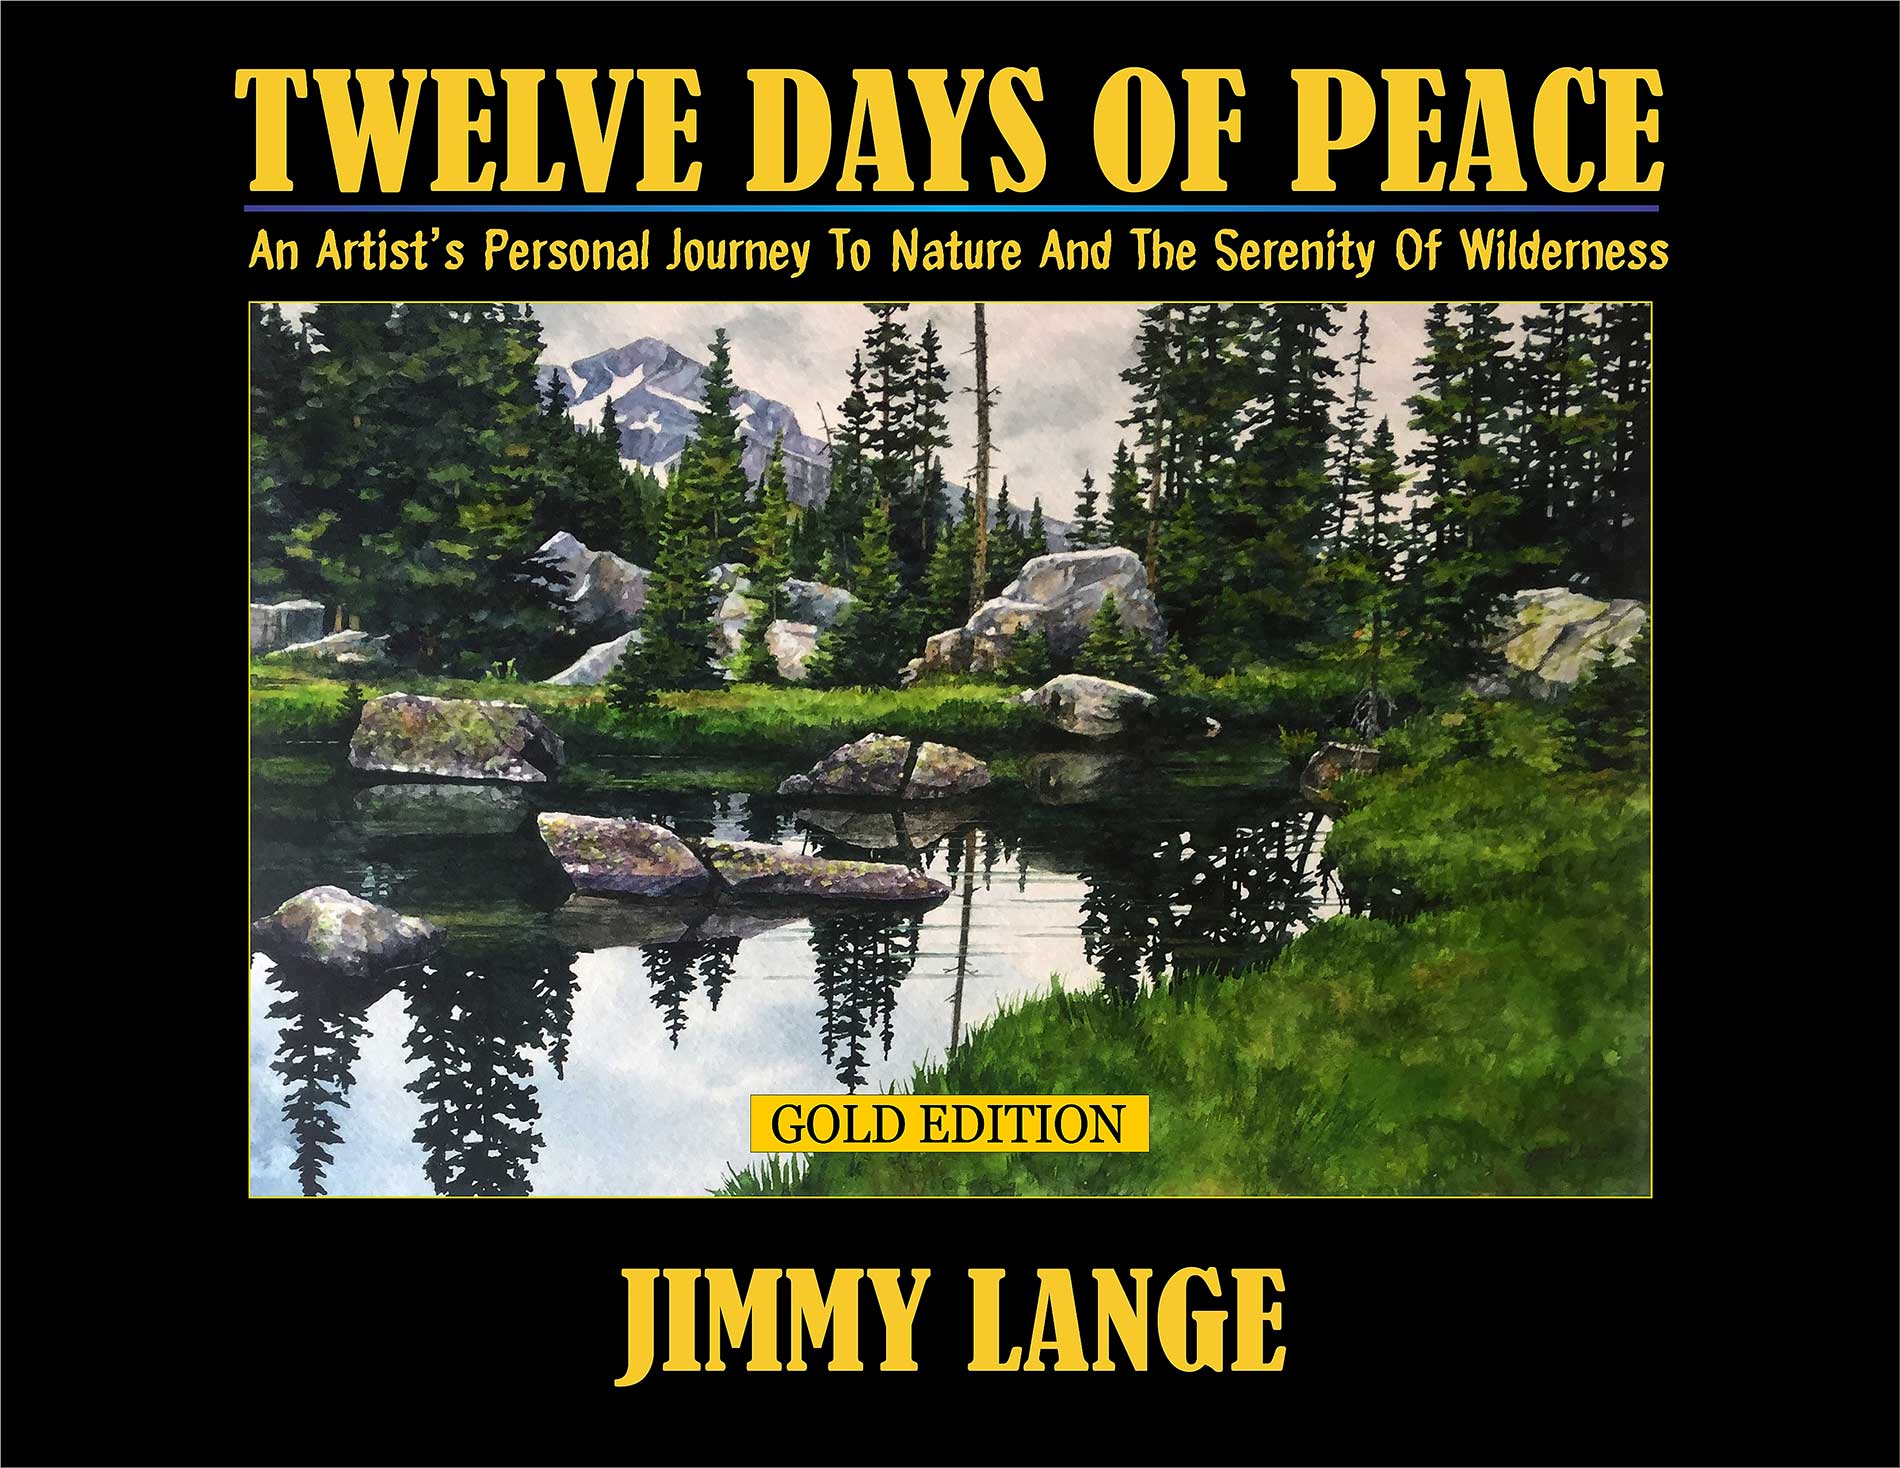 Personal　Days　Nature　Peace　of　–　and　12　An　Wilderness　Serenity　Company　Artist's　Publishing　Journey　Days　the　of　Twelve　to